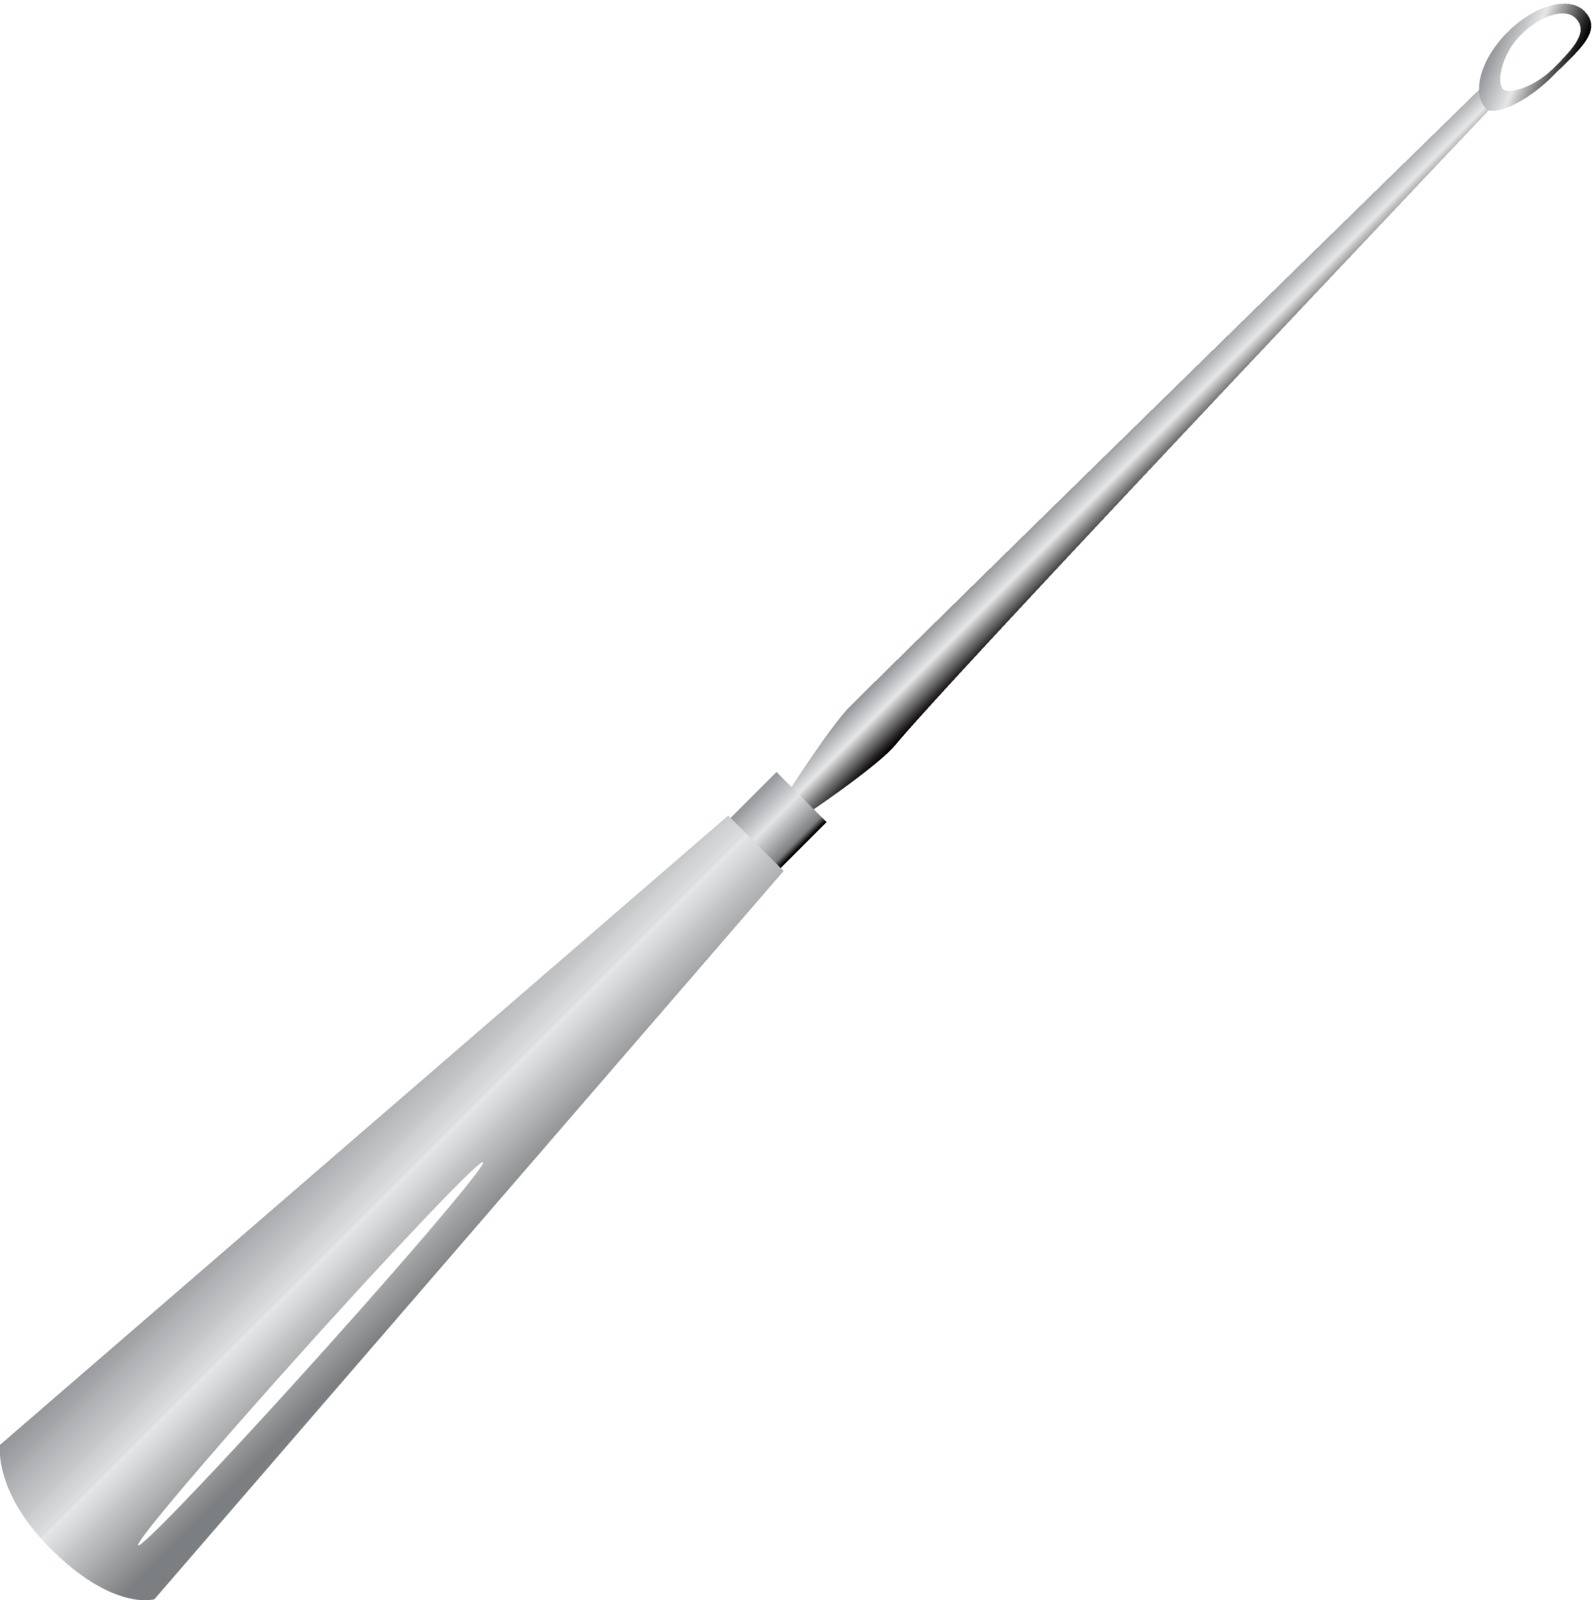 A curette is a surgical instrument designed for scraping or debriding biological tissue or debris in a biopsy, excision, or cleaning procedure. Vector illustration.